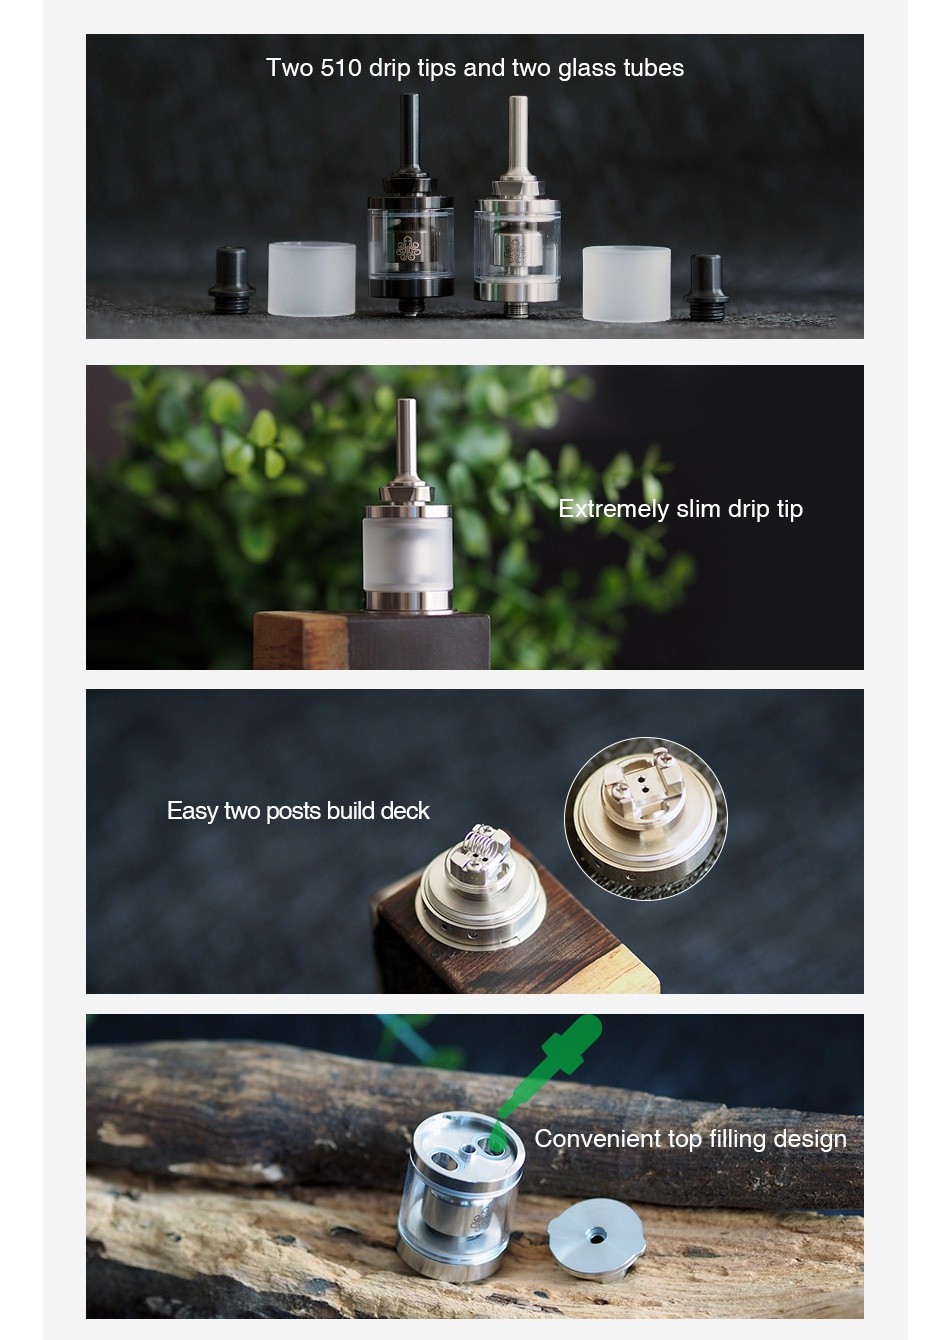 Cthulhu Hastur MTL RTA Mini 2ml Two 510 drip tips and two glass tubes Extremely slim drip tip Easy two posts build deck Convenient top filling design